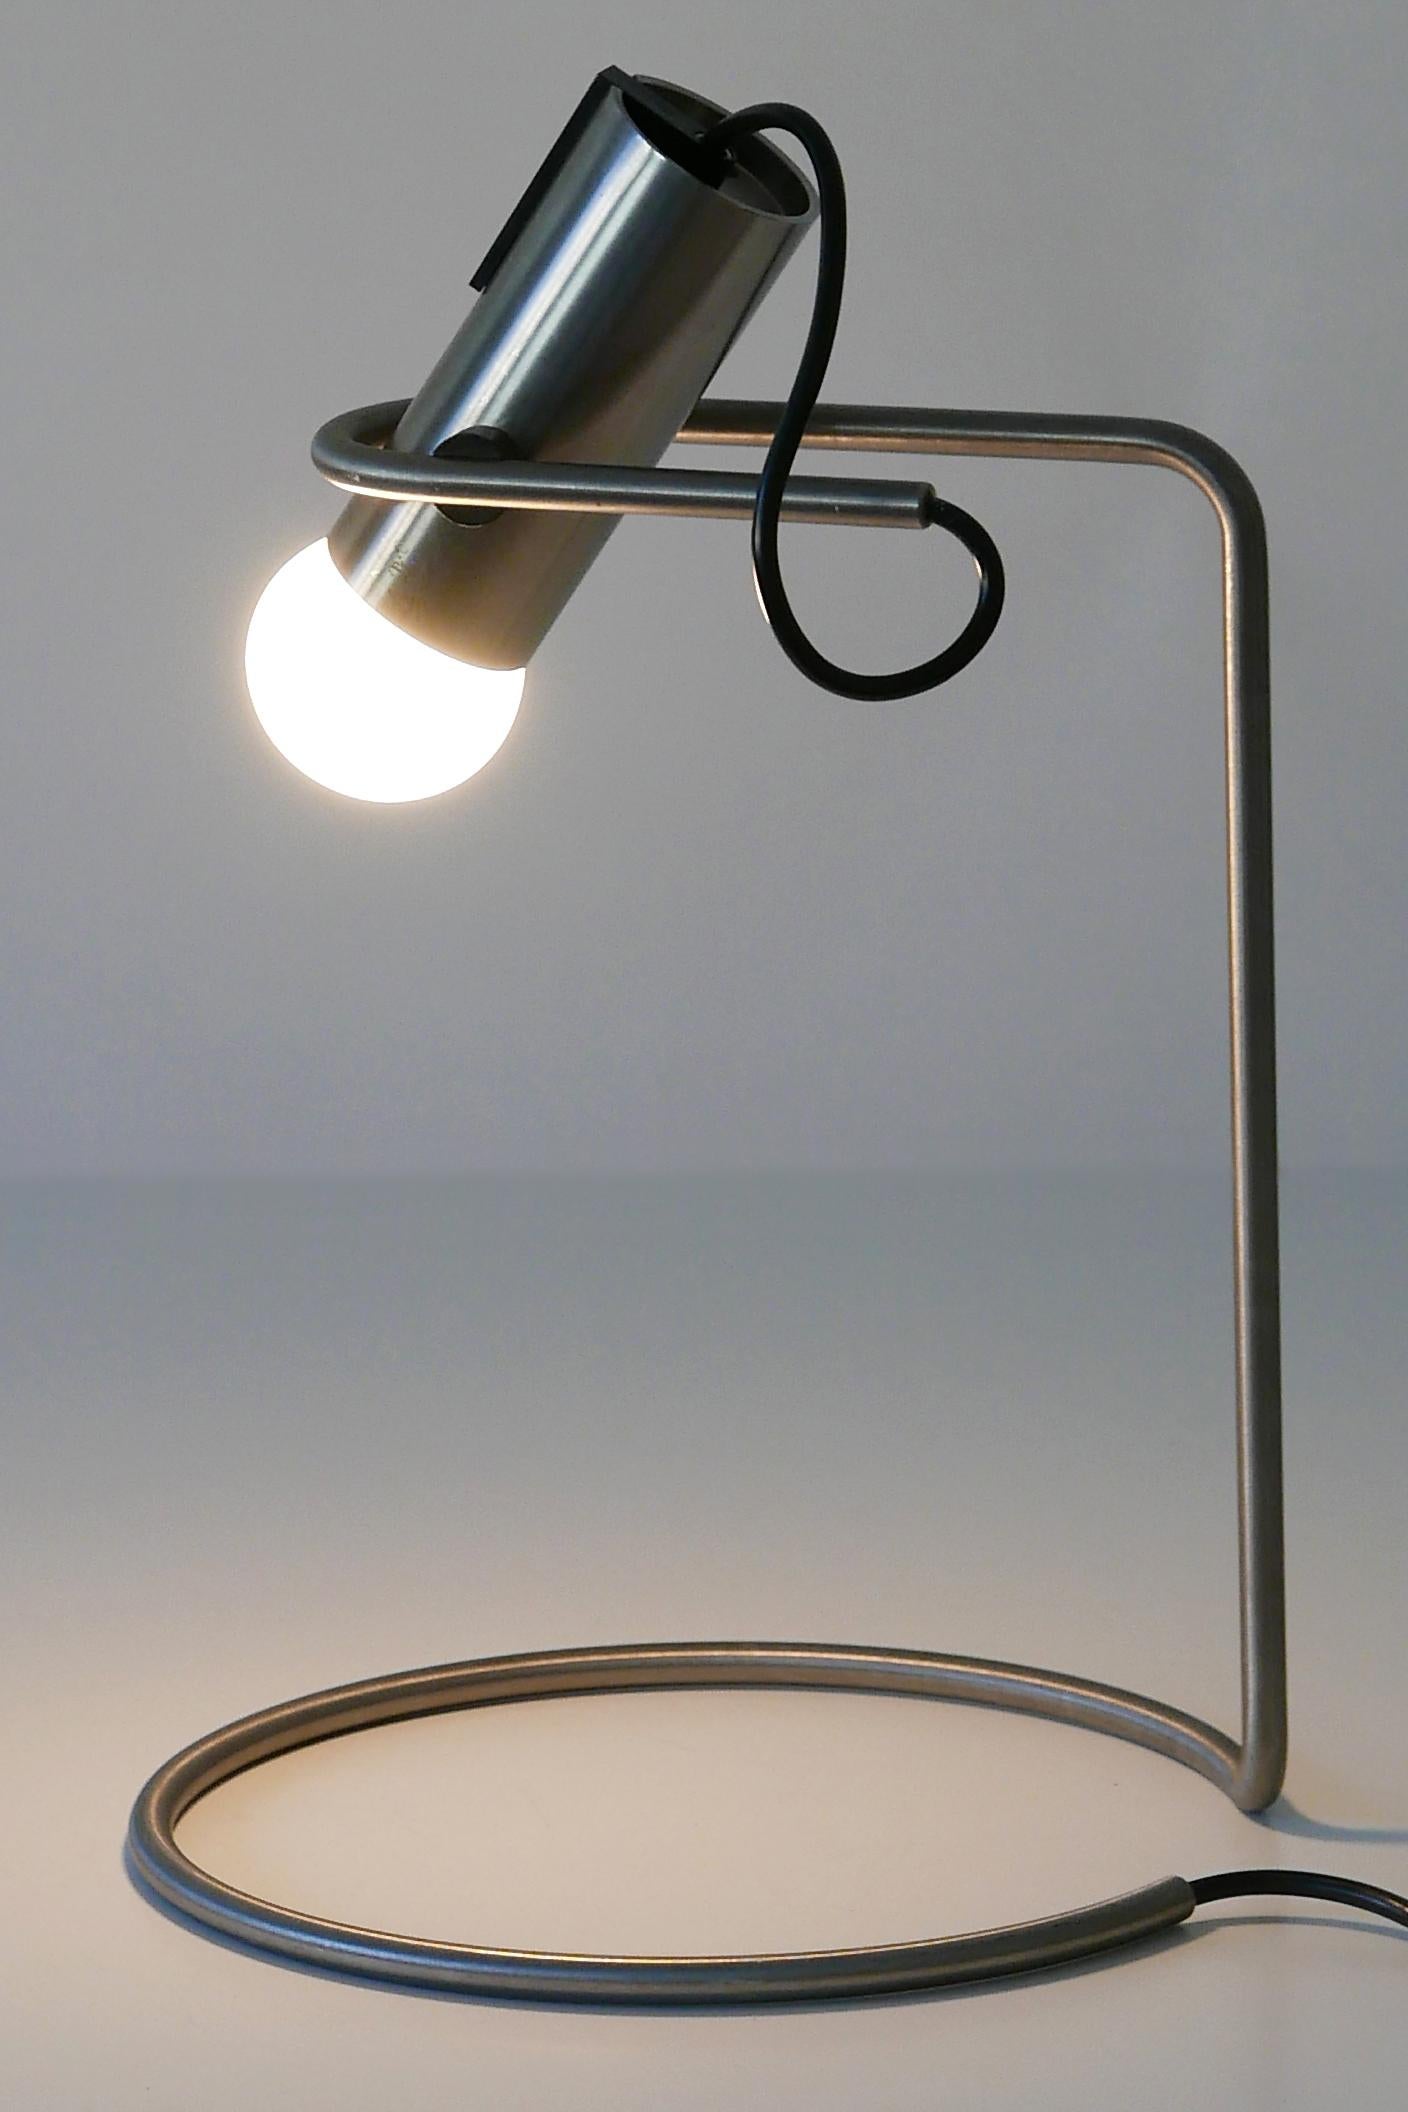 Stainless Steel Exceptional Minimalistic Mid-Century Modern Table Lamp or Desk Light, 1960s For Sale